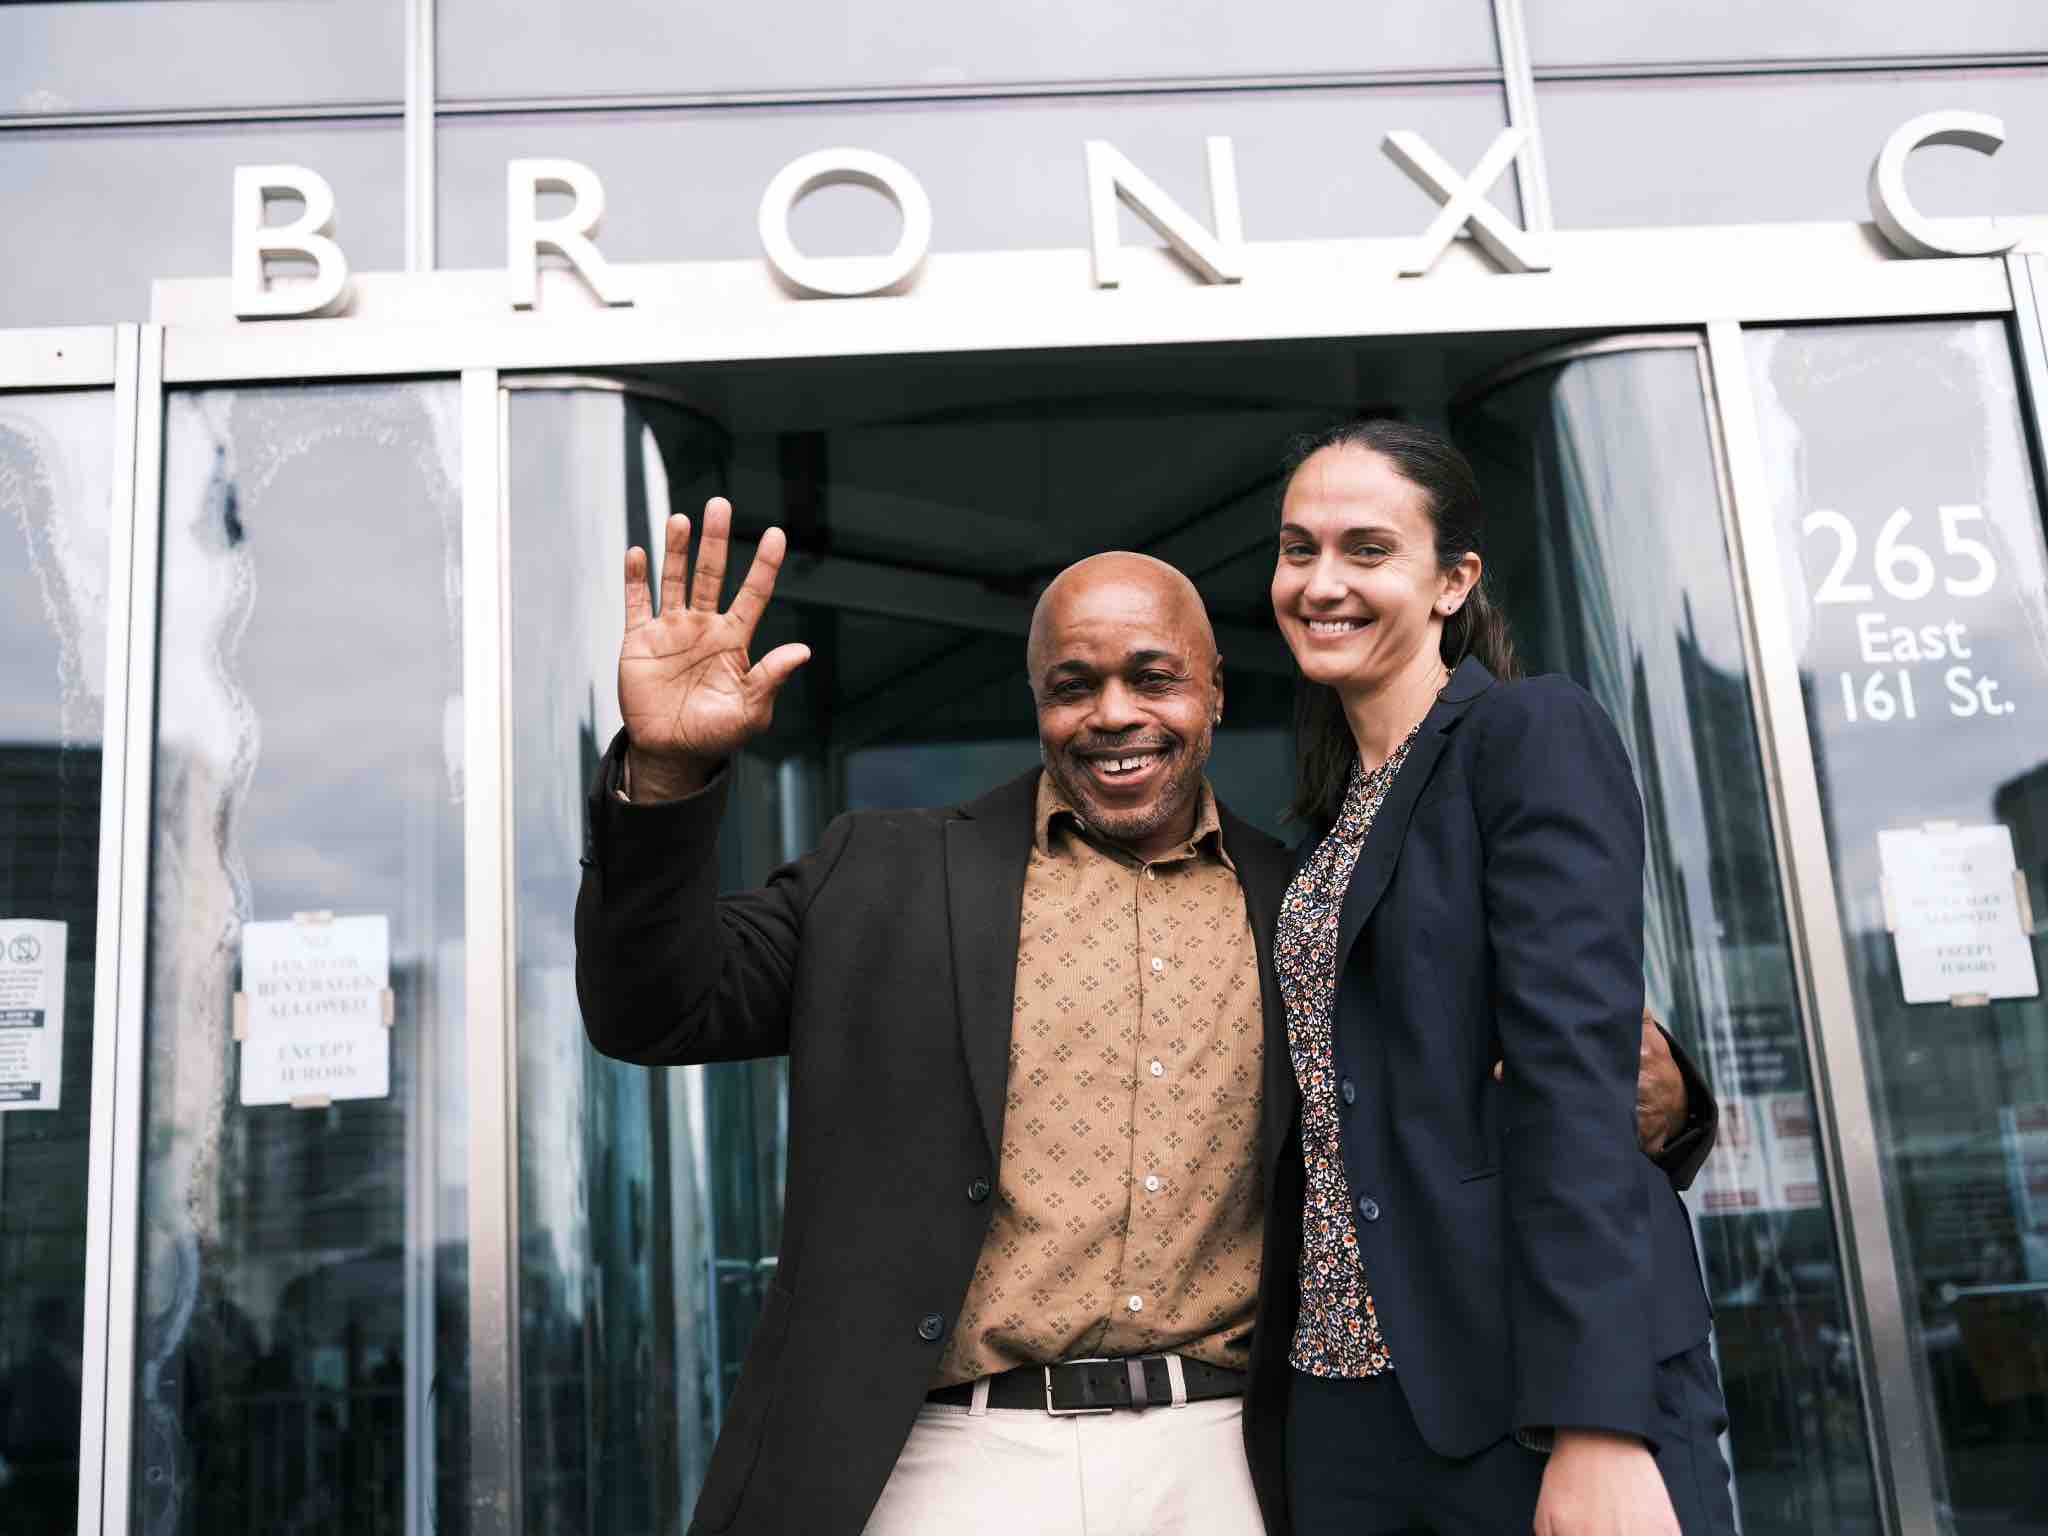 Norberto Peets walking outside a Bronx courthouse with his attorney Jane Pucher following his exoneration on May 9, 2023 (Image: Elijah Craig II Innocence Project)